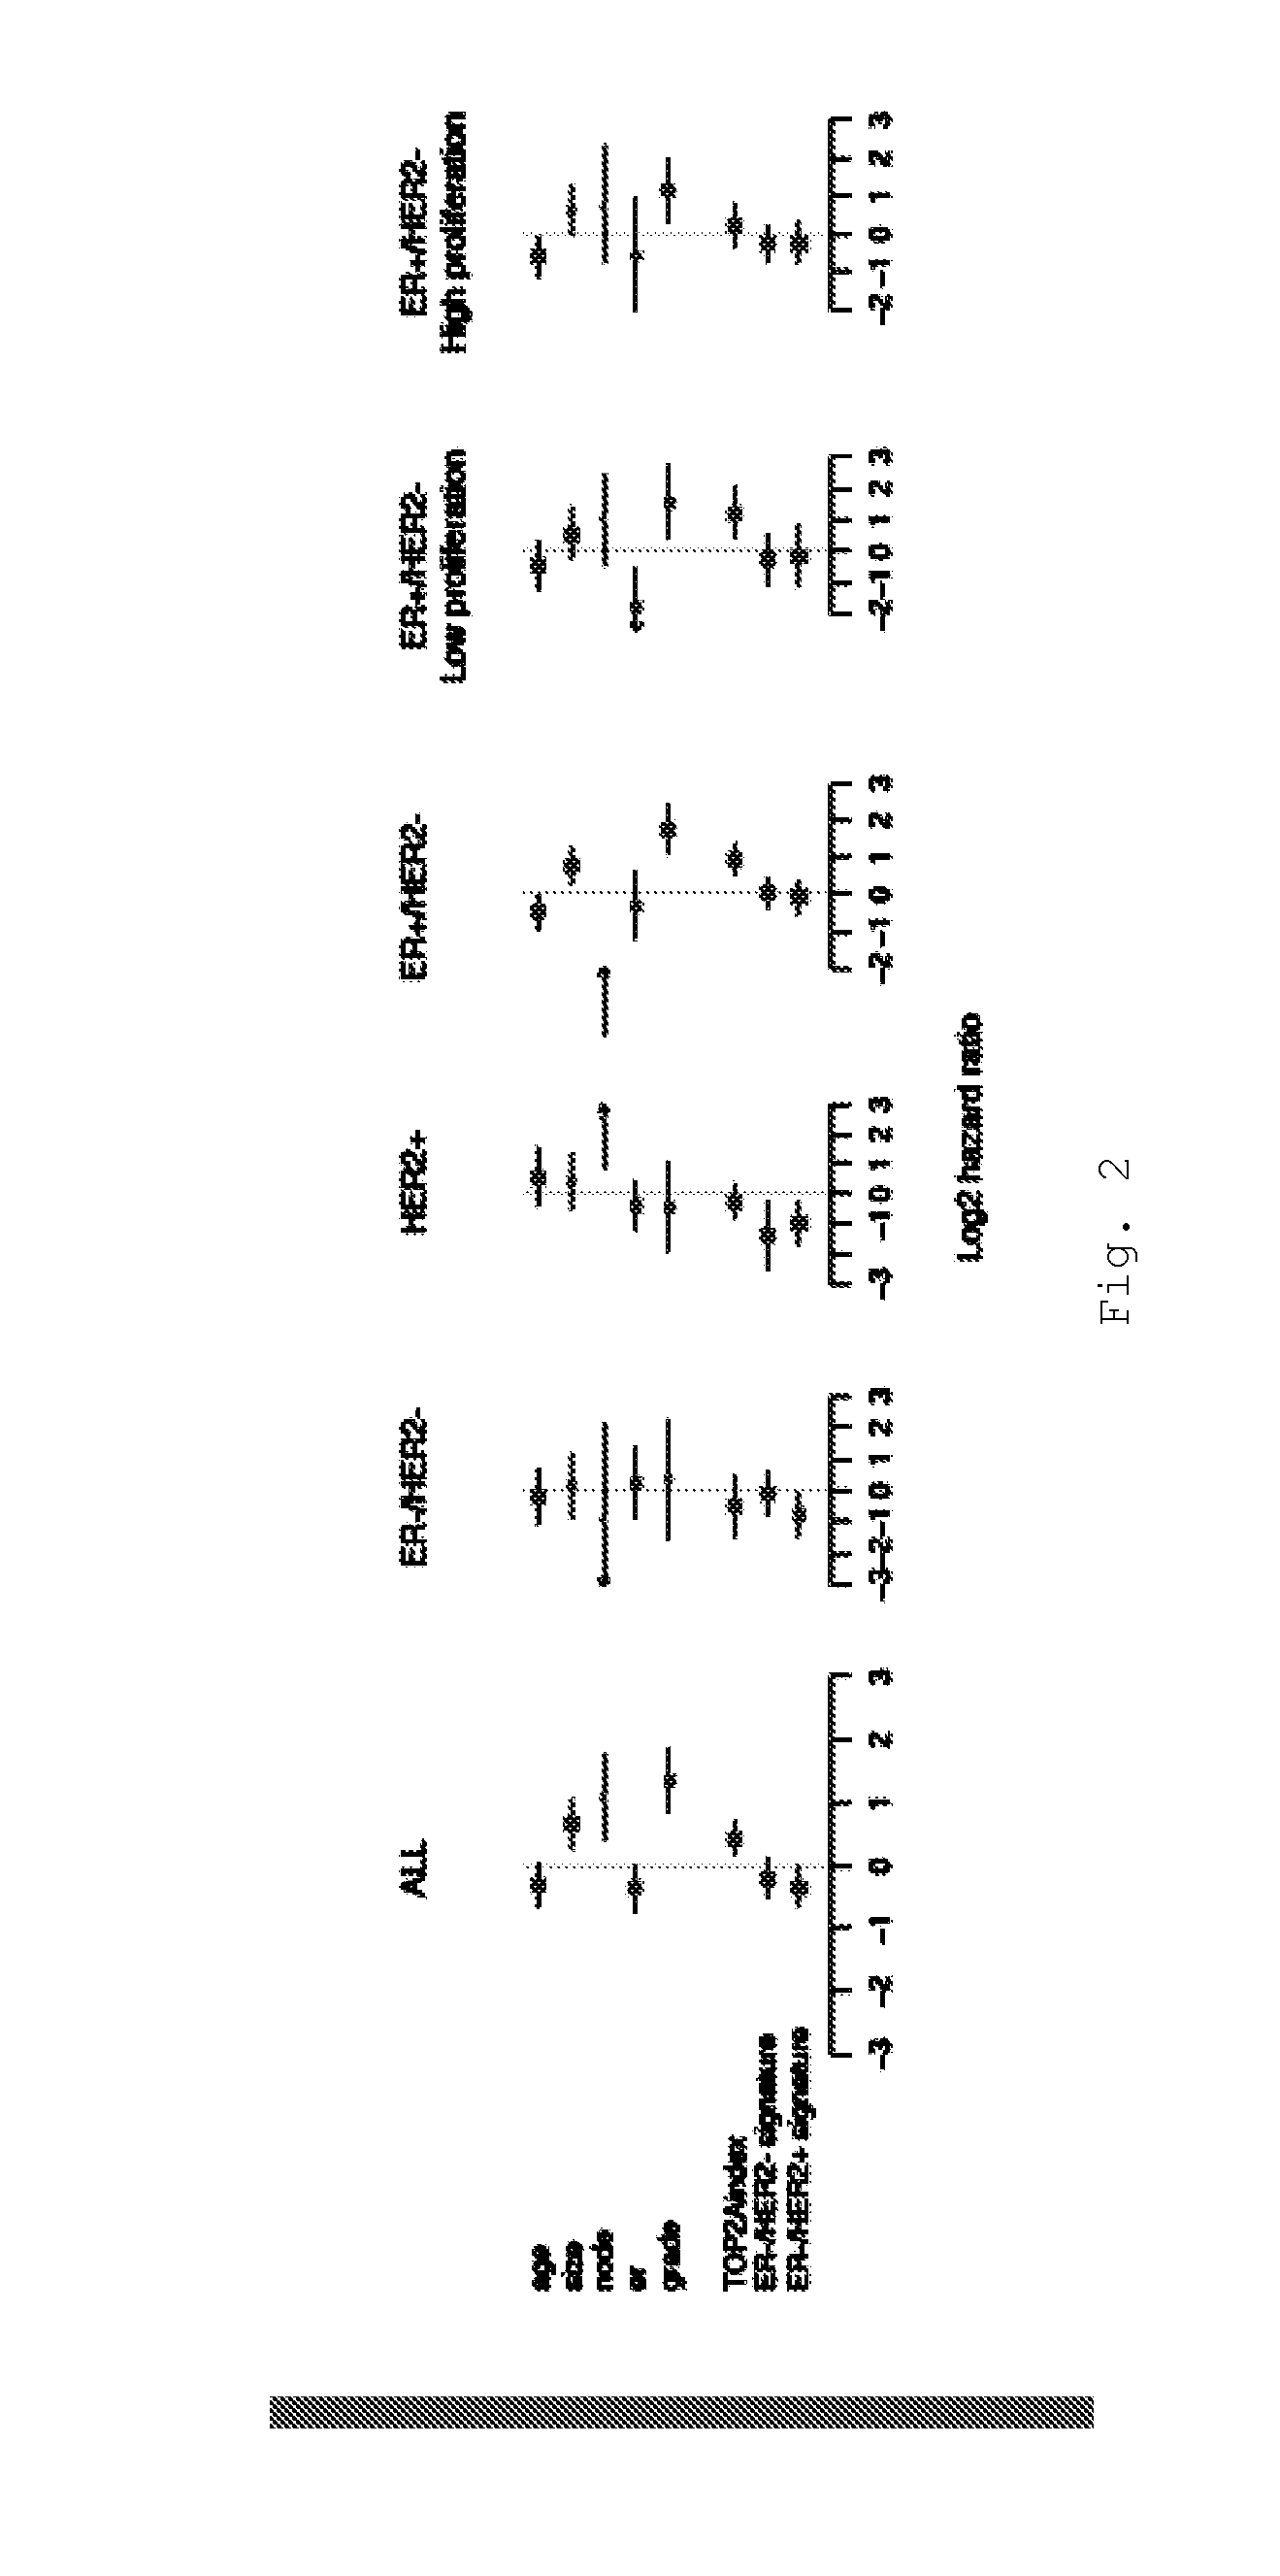 Methods and tools for predicting the efficiency of anthracyclines in cancer